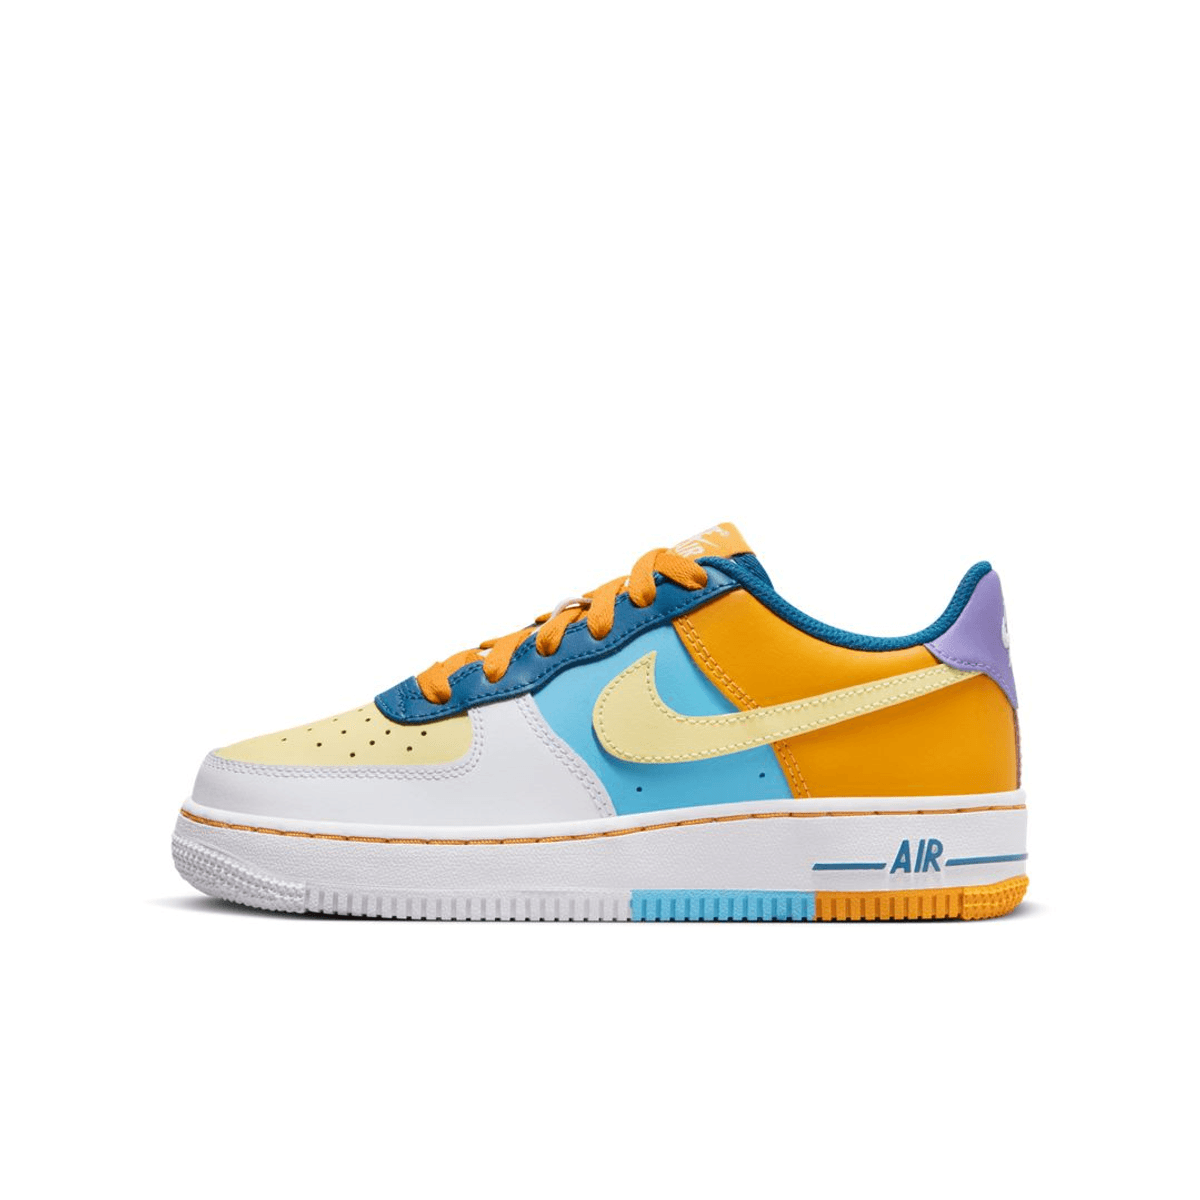 The Nike Air Force 1 Low GS “What The” Releases November 3rd